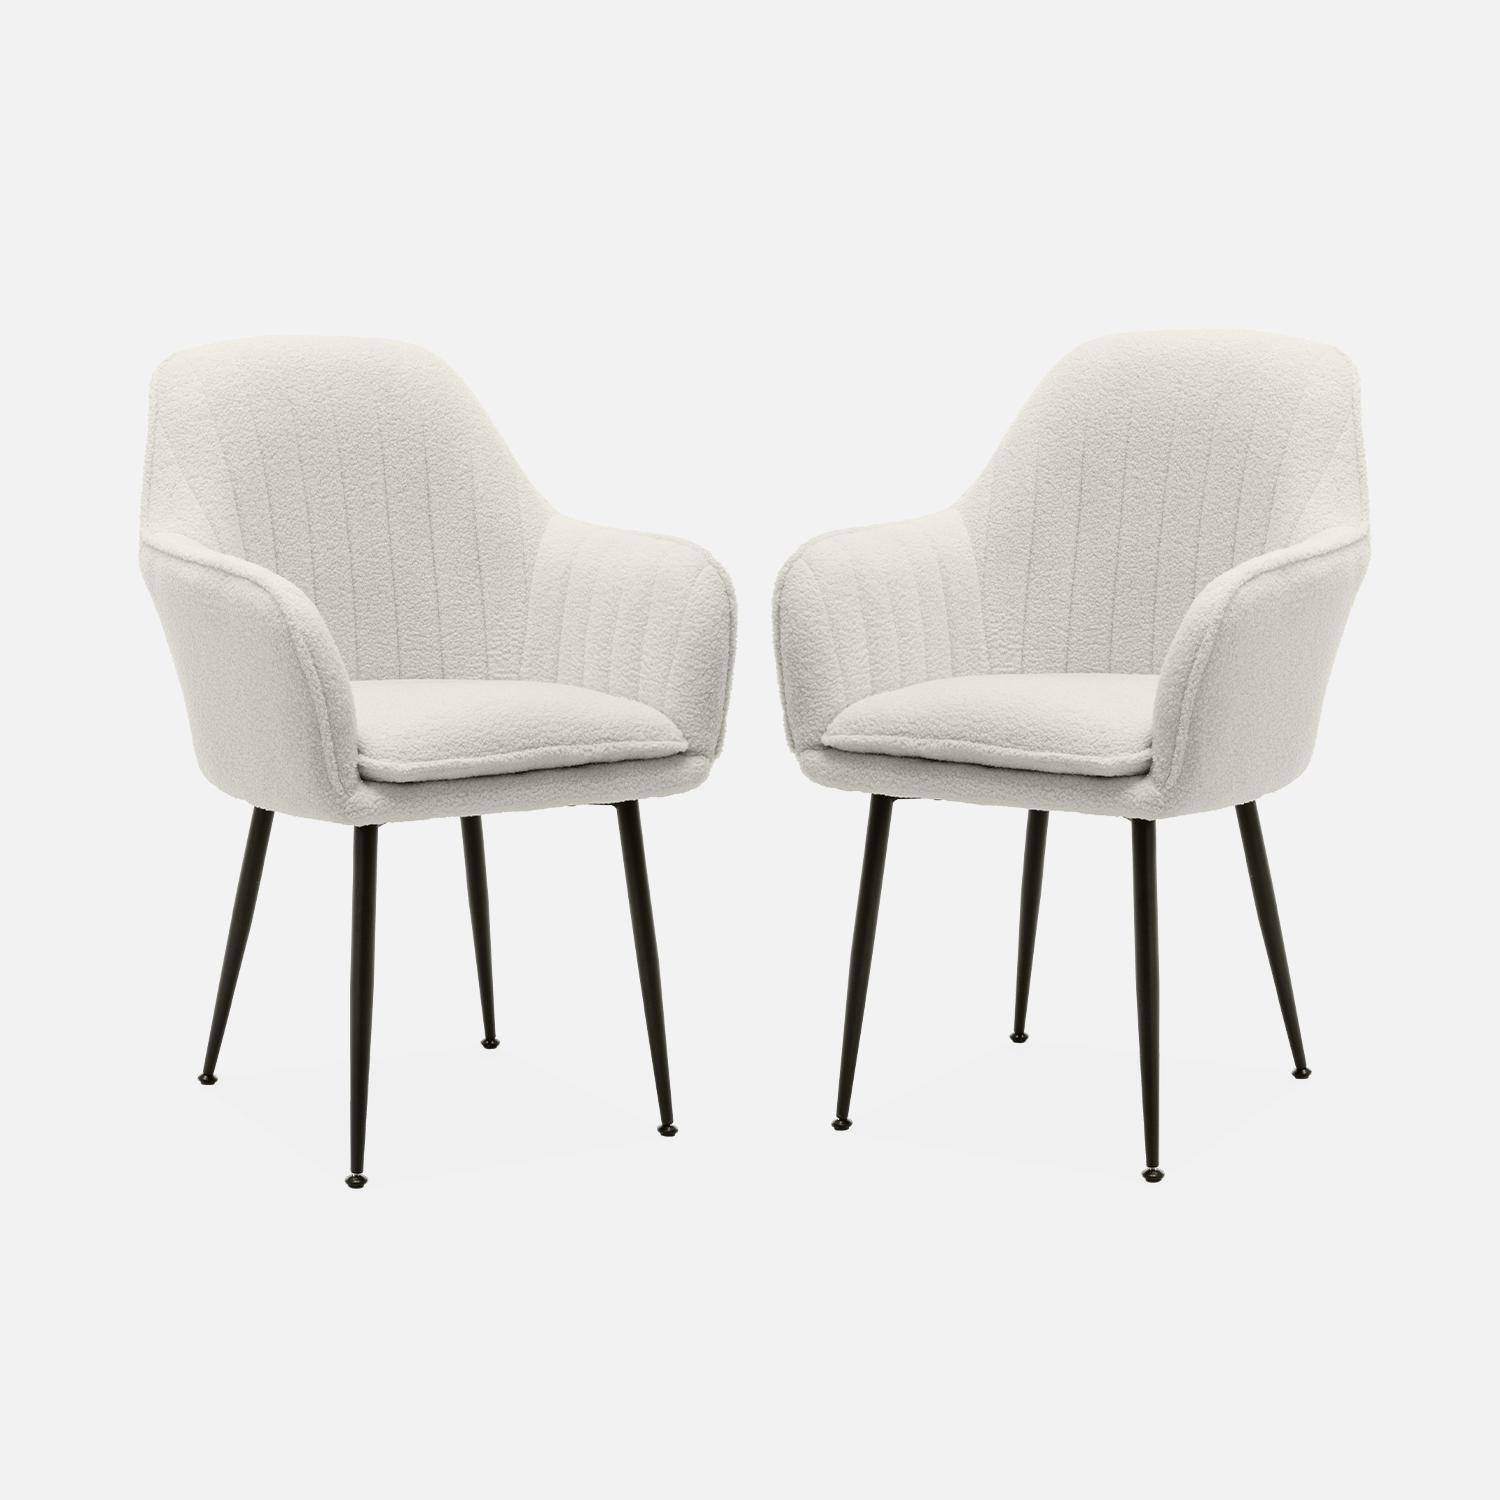 Set of 2 Boucle armchair with metal legs, 58x58x85cm - Shella Boucle - White Photo3